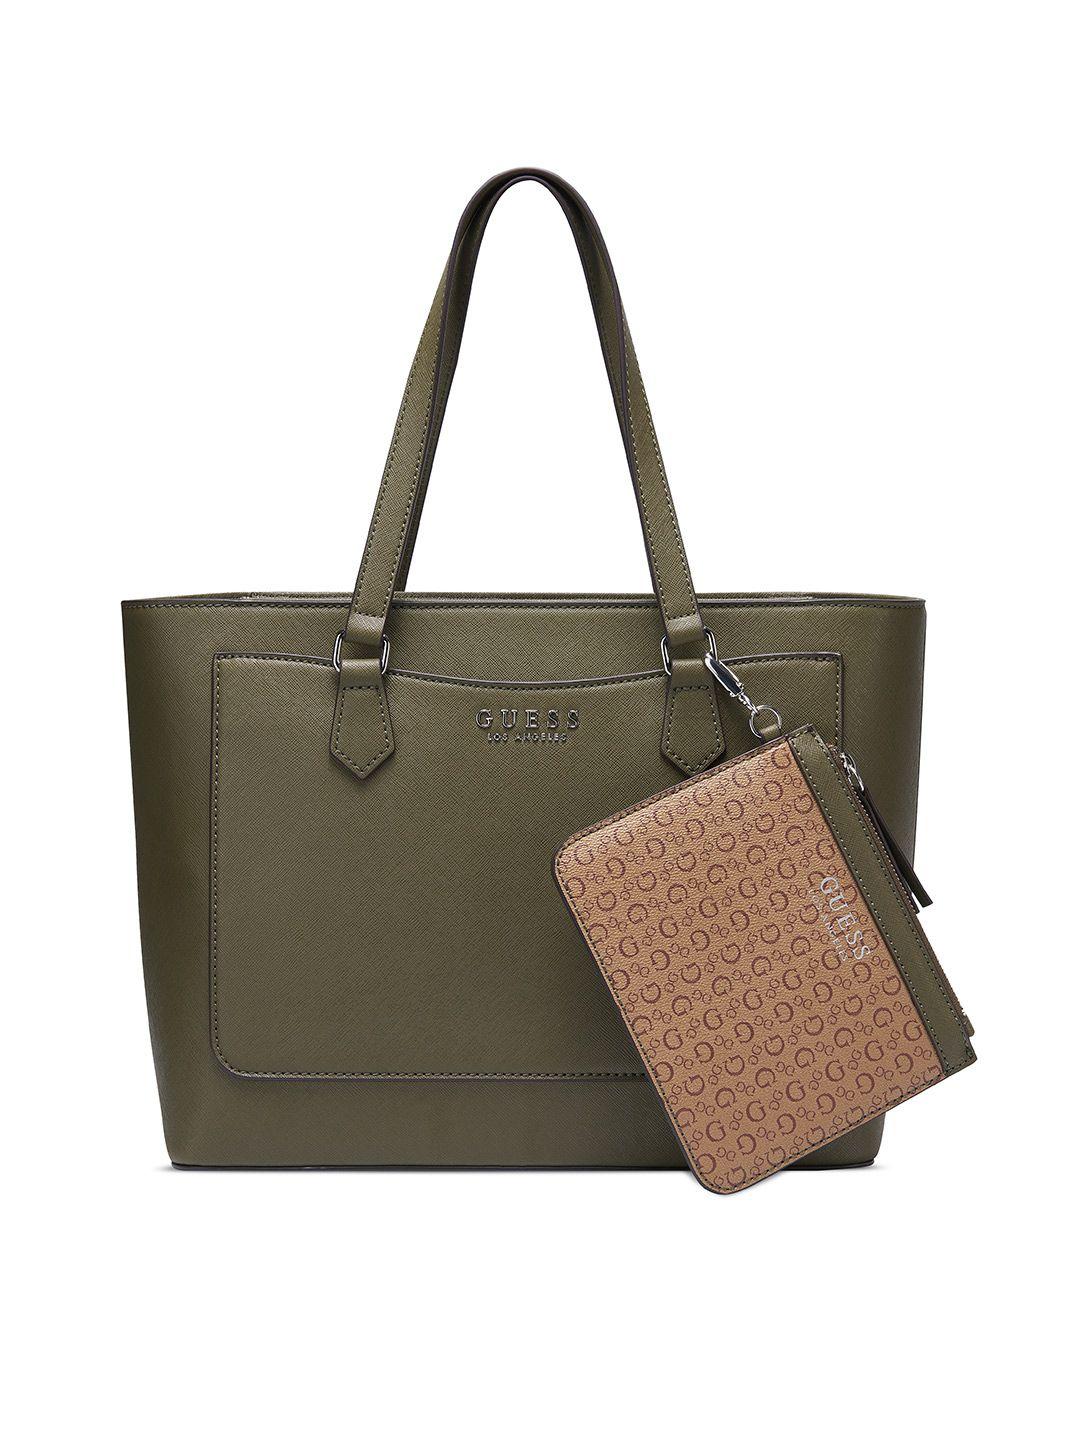 guess structured shoulder bag with a pouch